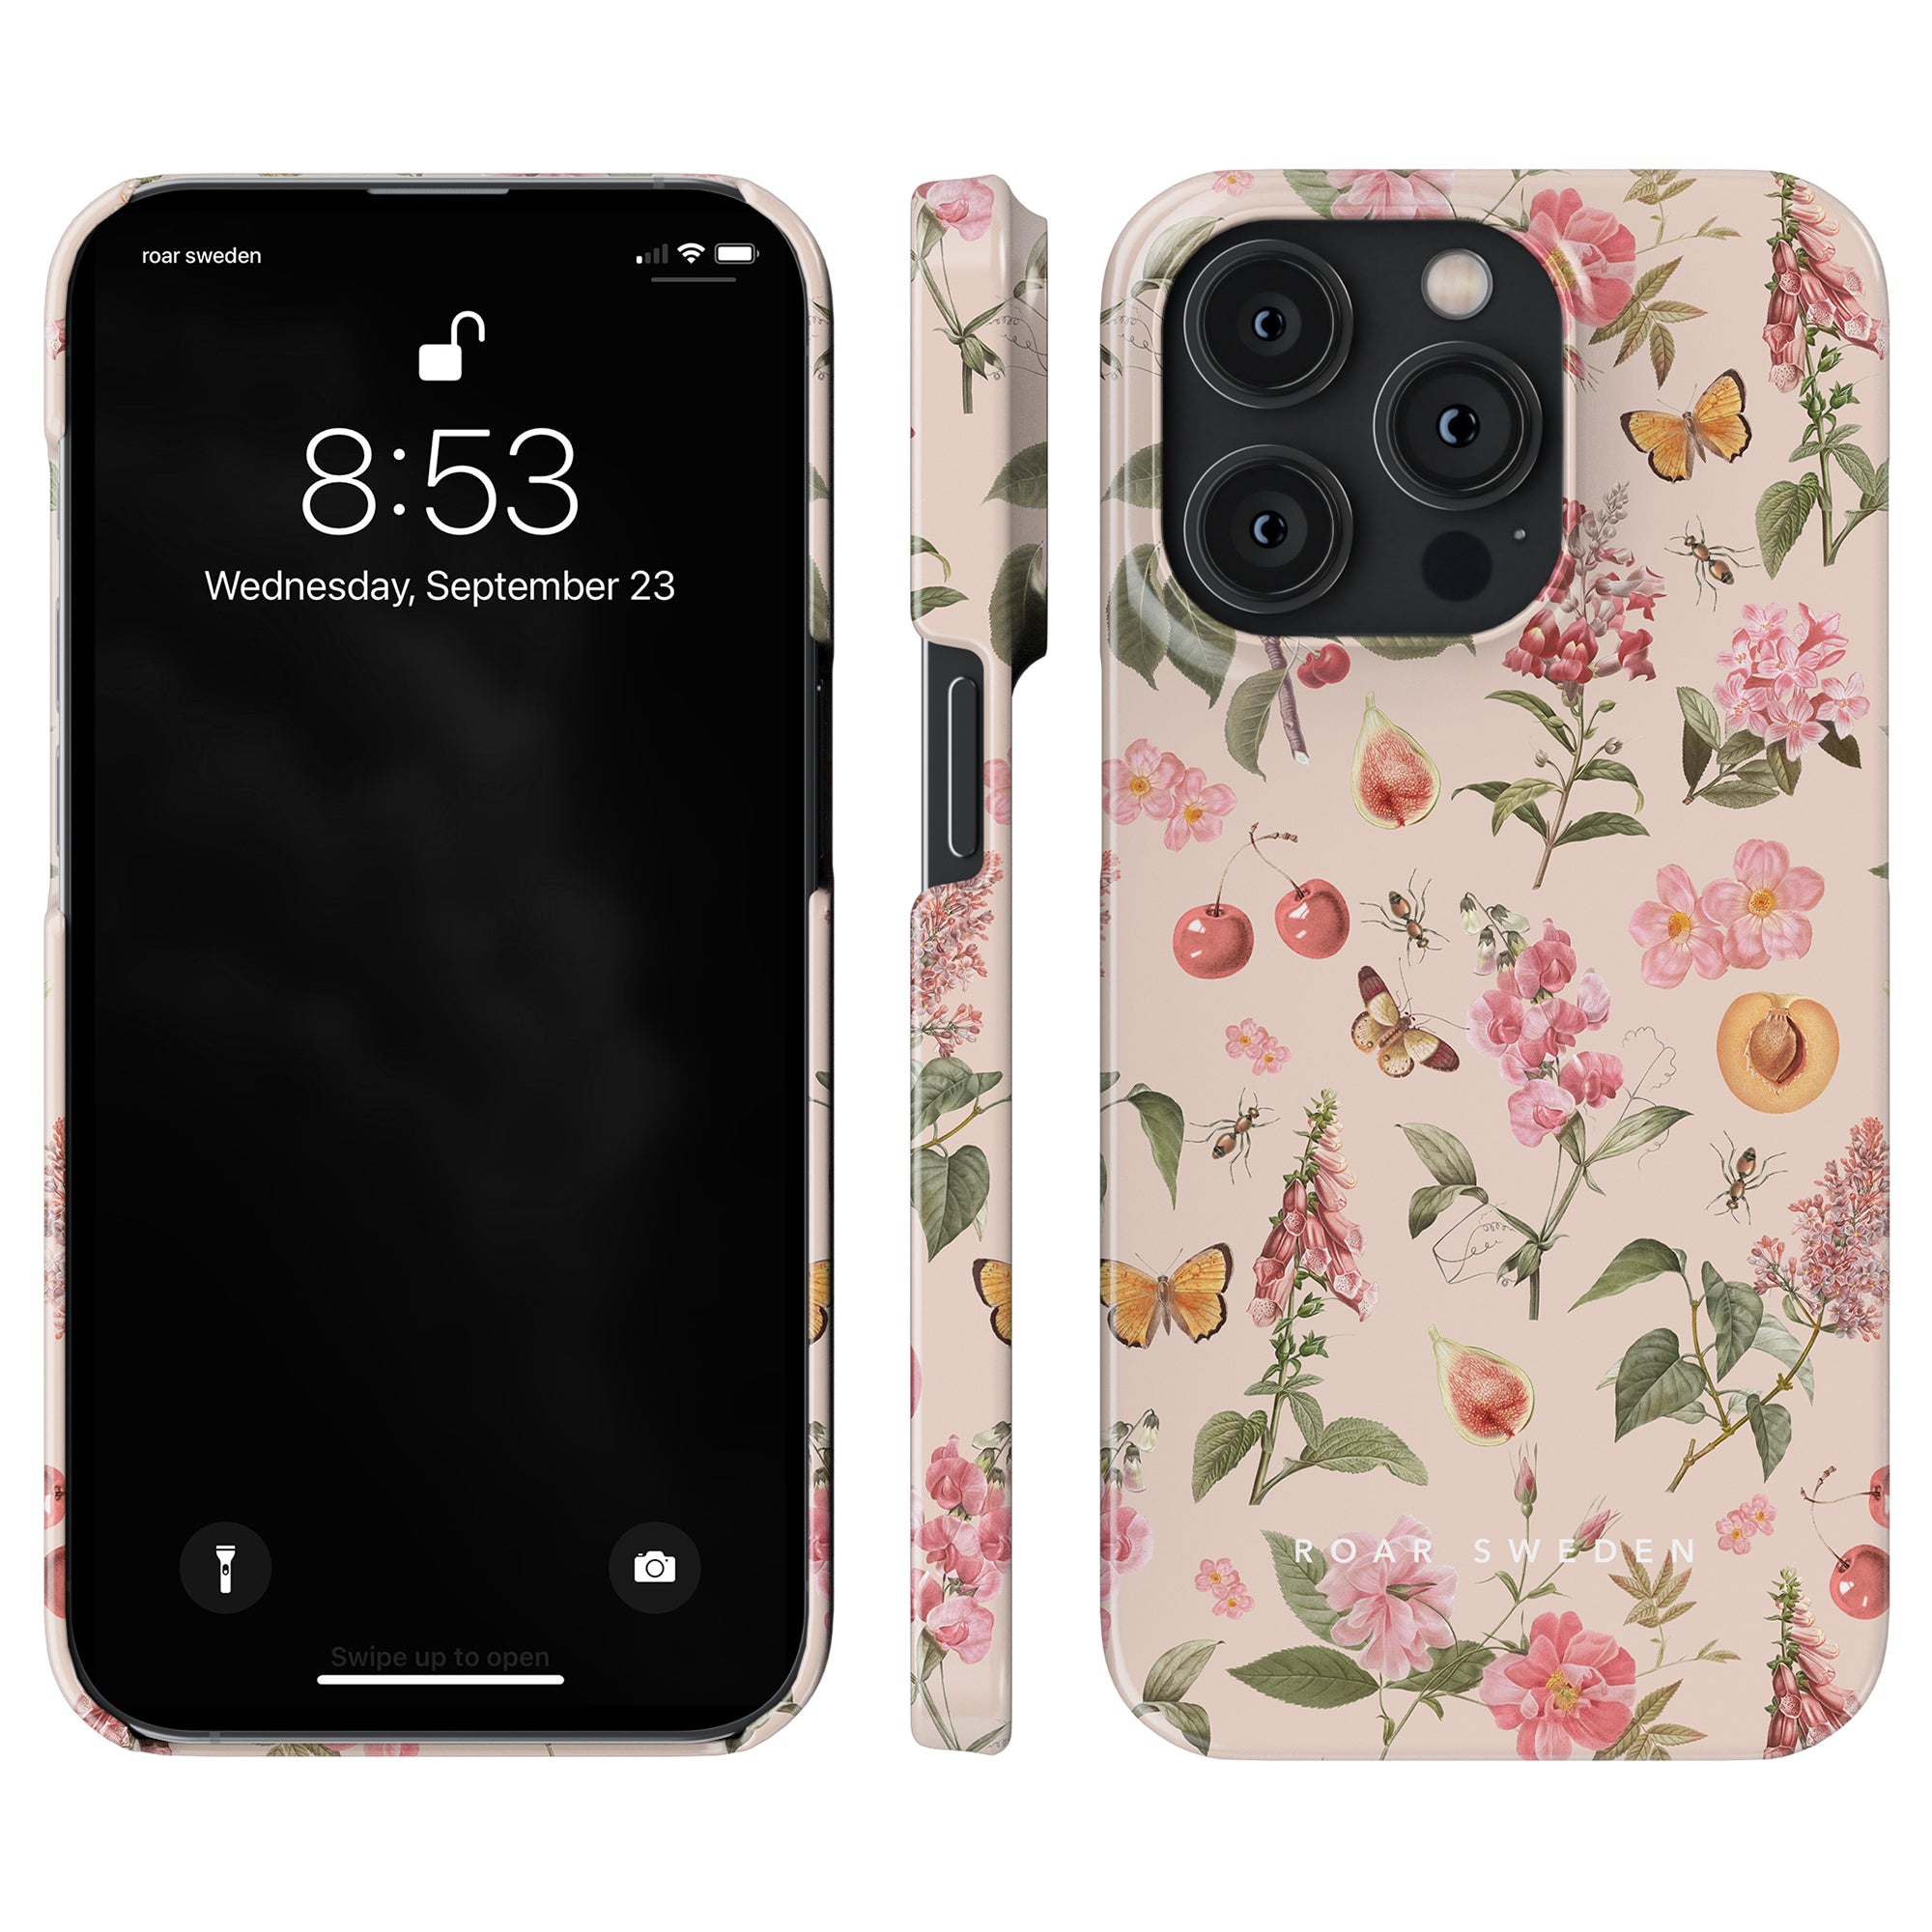 Smartphone with a Romantic Spring - Slim case showcasing the lock screen on a white background, perfect for product description and SEO keywords.